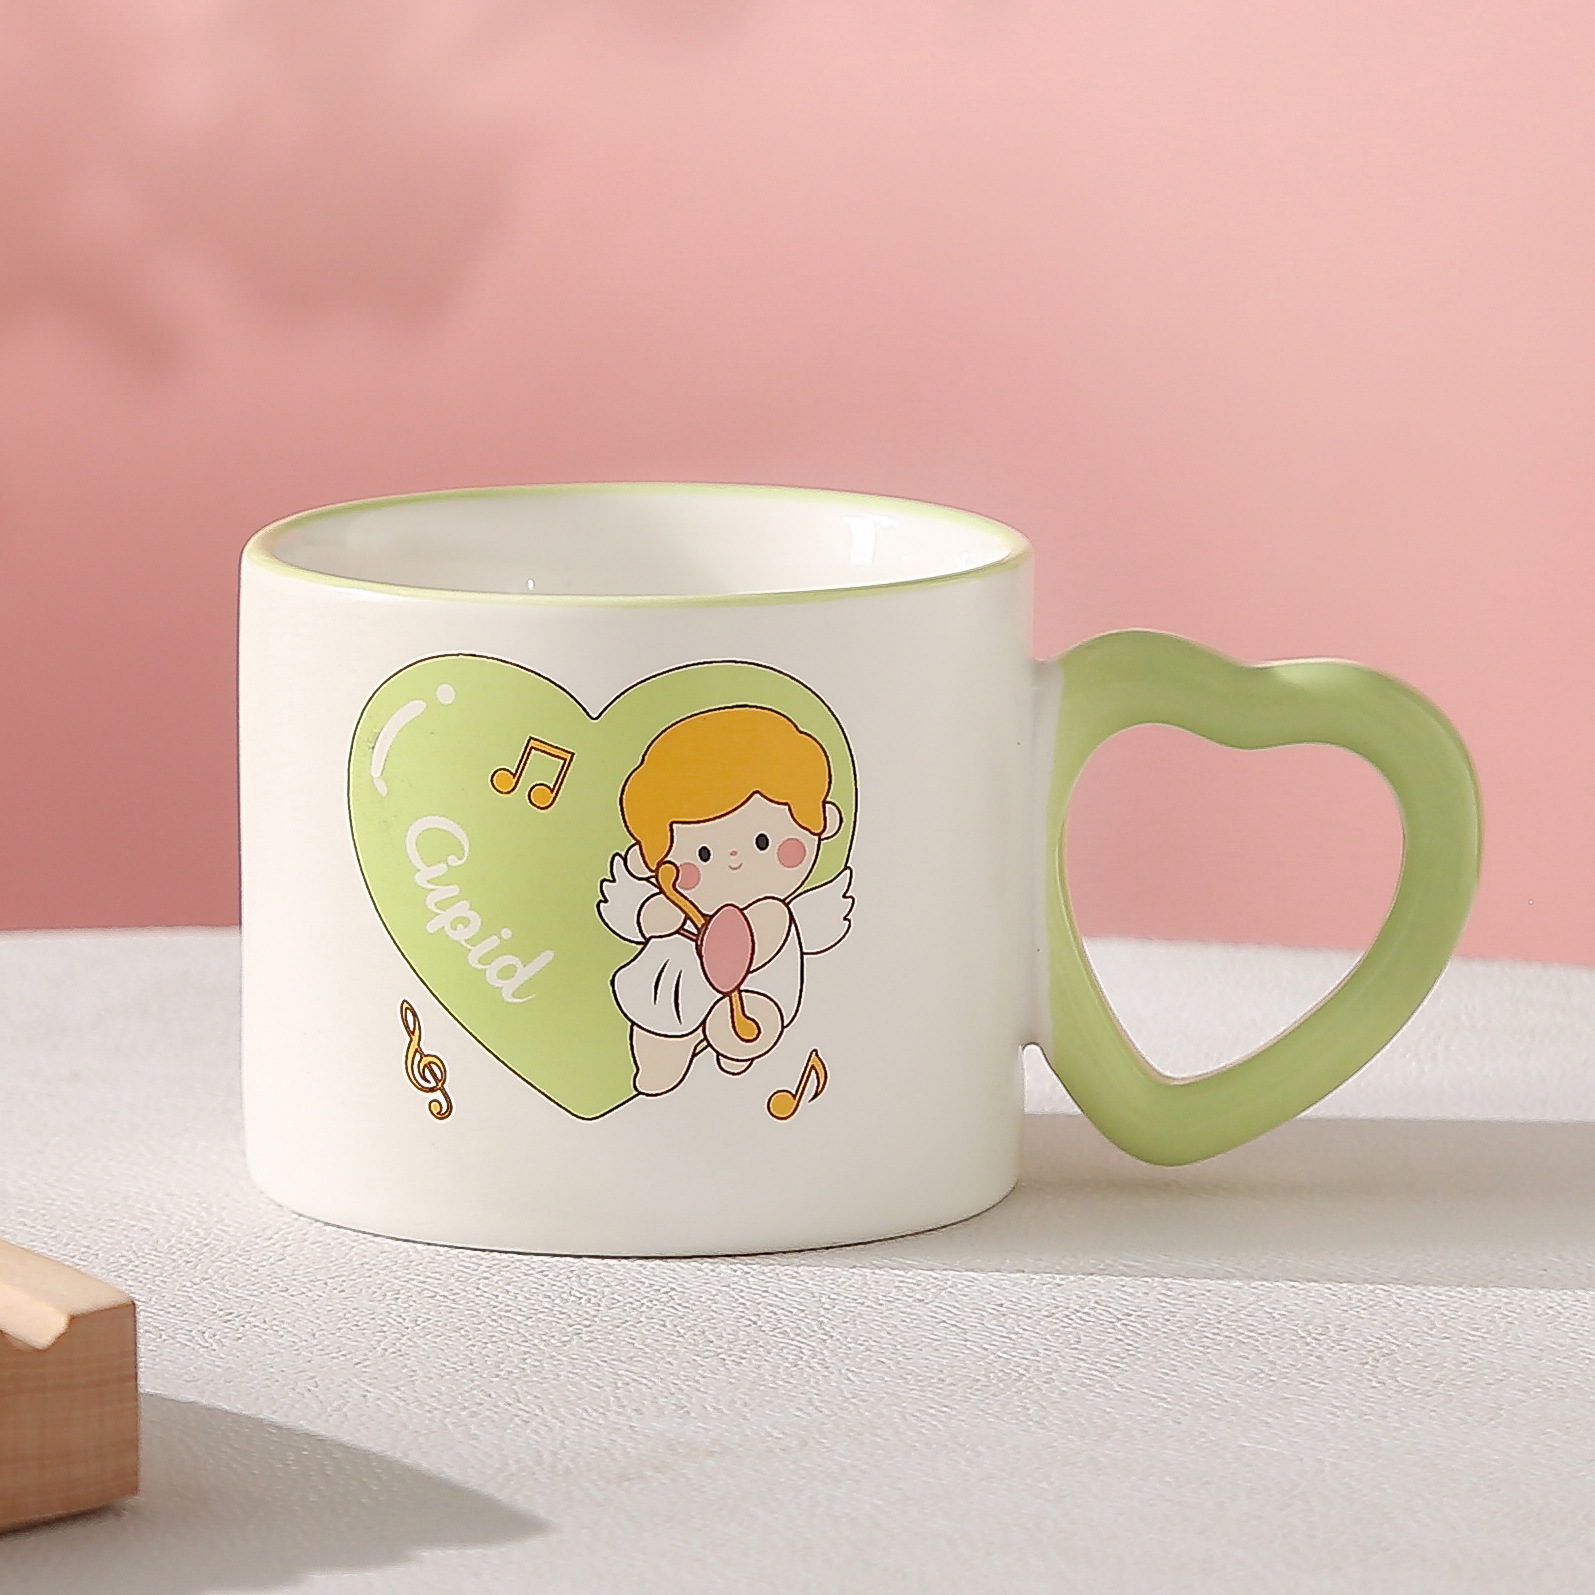 Ceramic Cup Cute Household Milk Water Glass Female Student Breakfast Cup Mug Office Cup Cupid Coffee Cup